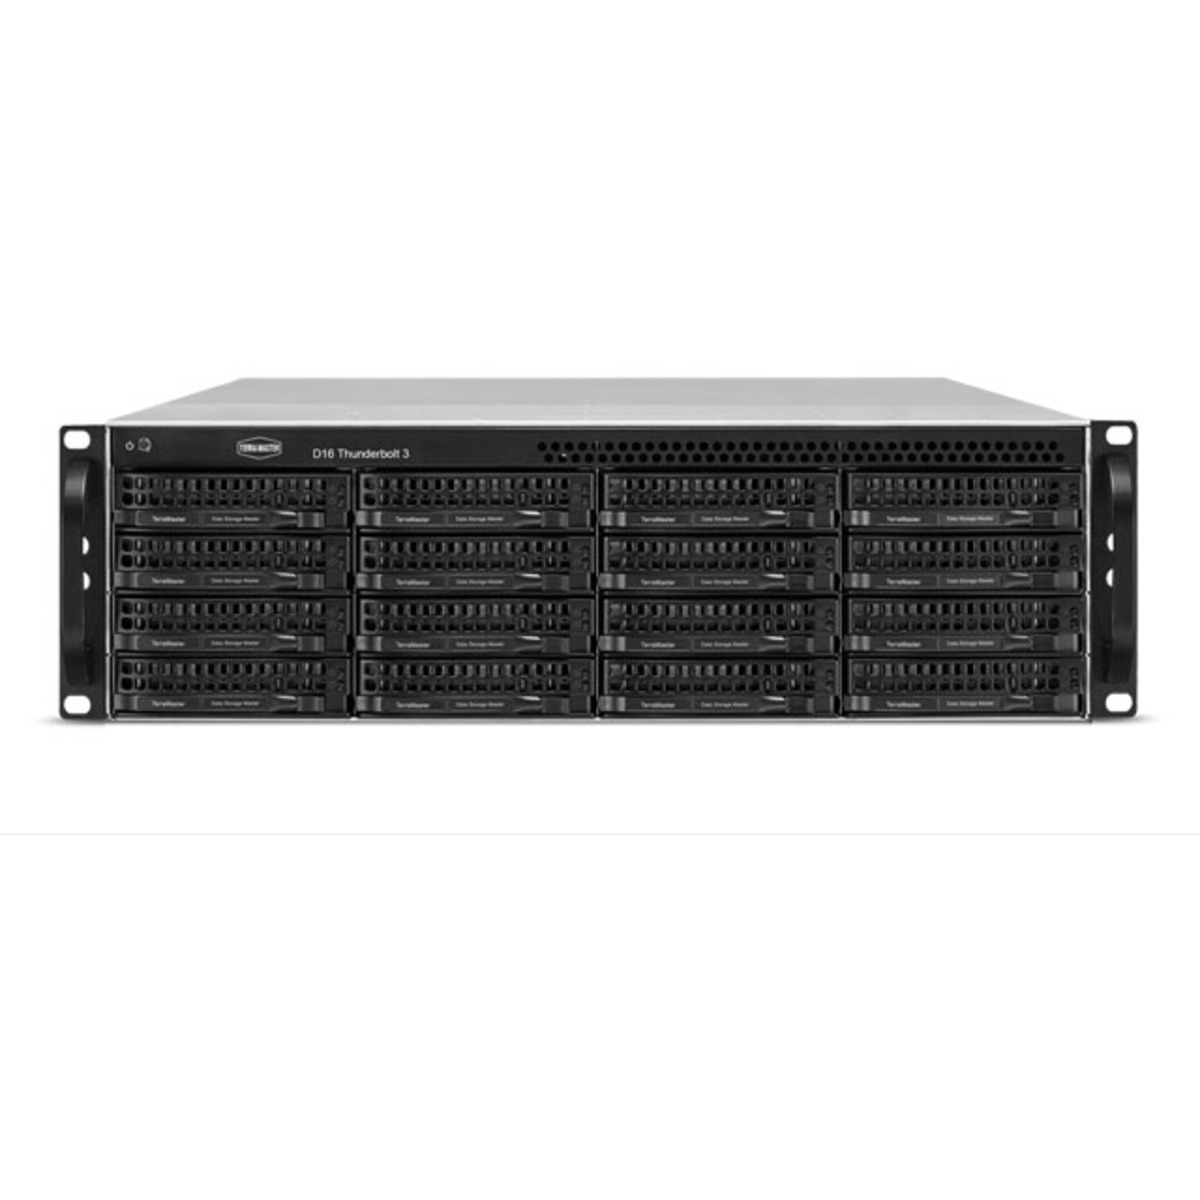 TerraMaster D16 Thunderbolt 3 182tb 16-Bay RackMount Multimedia / Power User / Business DAS - Direct Attached Storage Device 13x14tb Seagate EXOS X18 ST14000NM000J 3.5 7200rpm SATA 6Gb/s HDD ENTERPRISE Class Drives Installed - Burn-In Tested D16 Thunderbolt 3